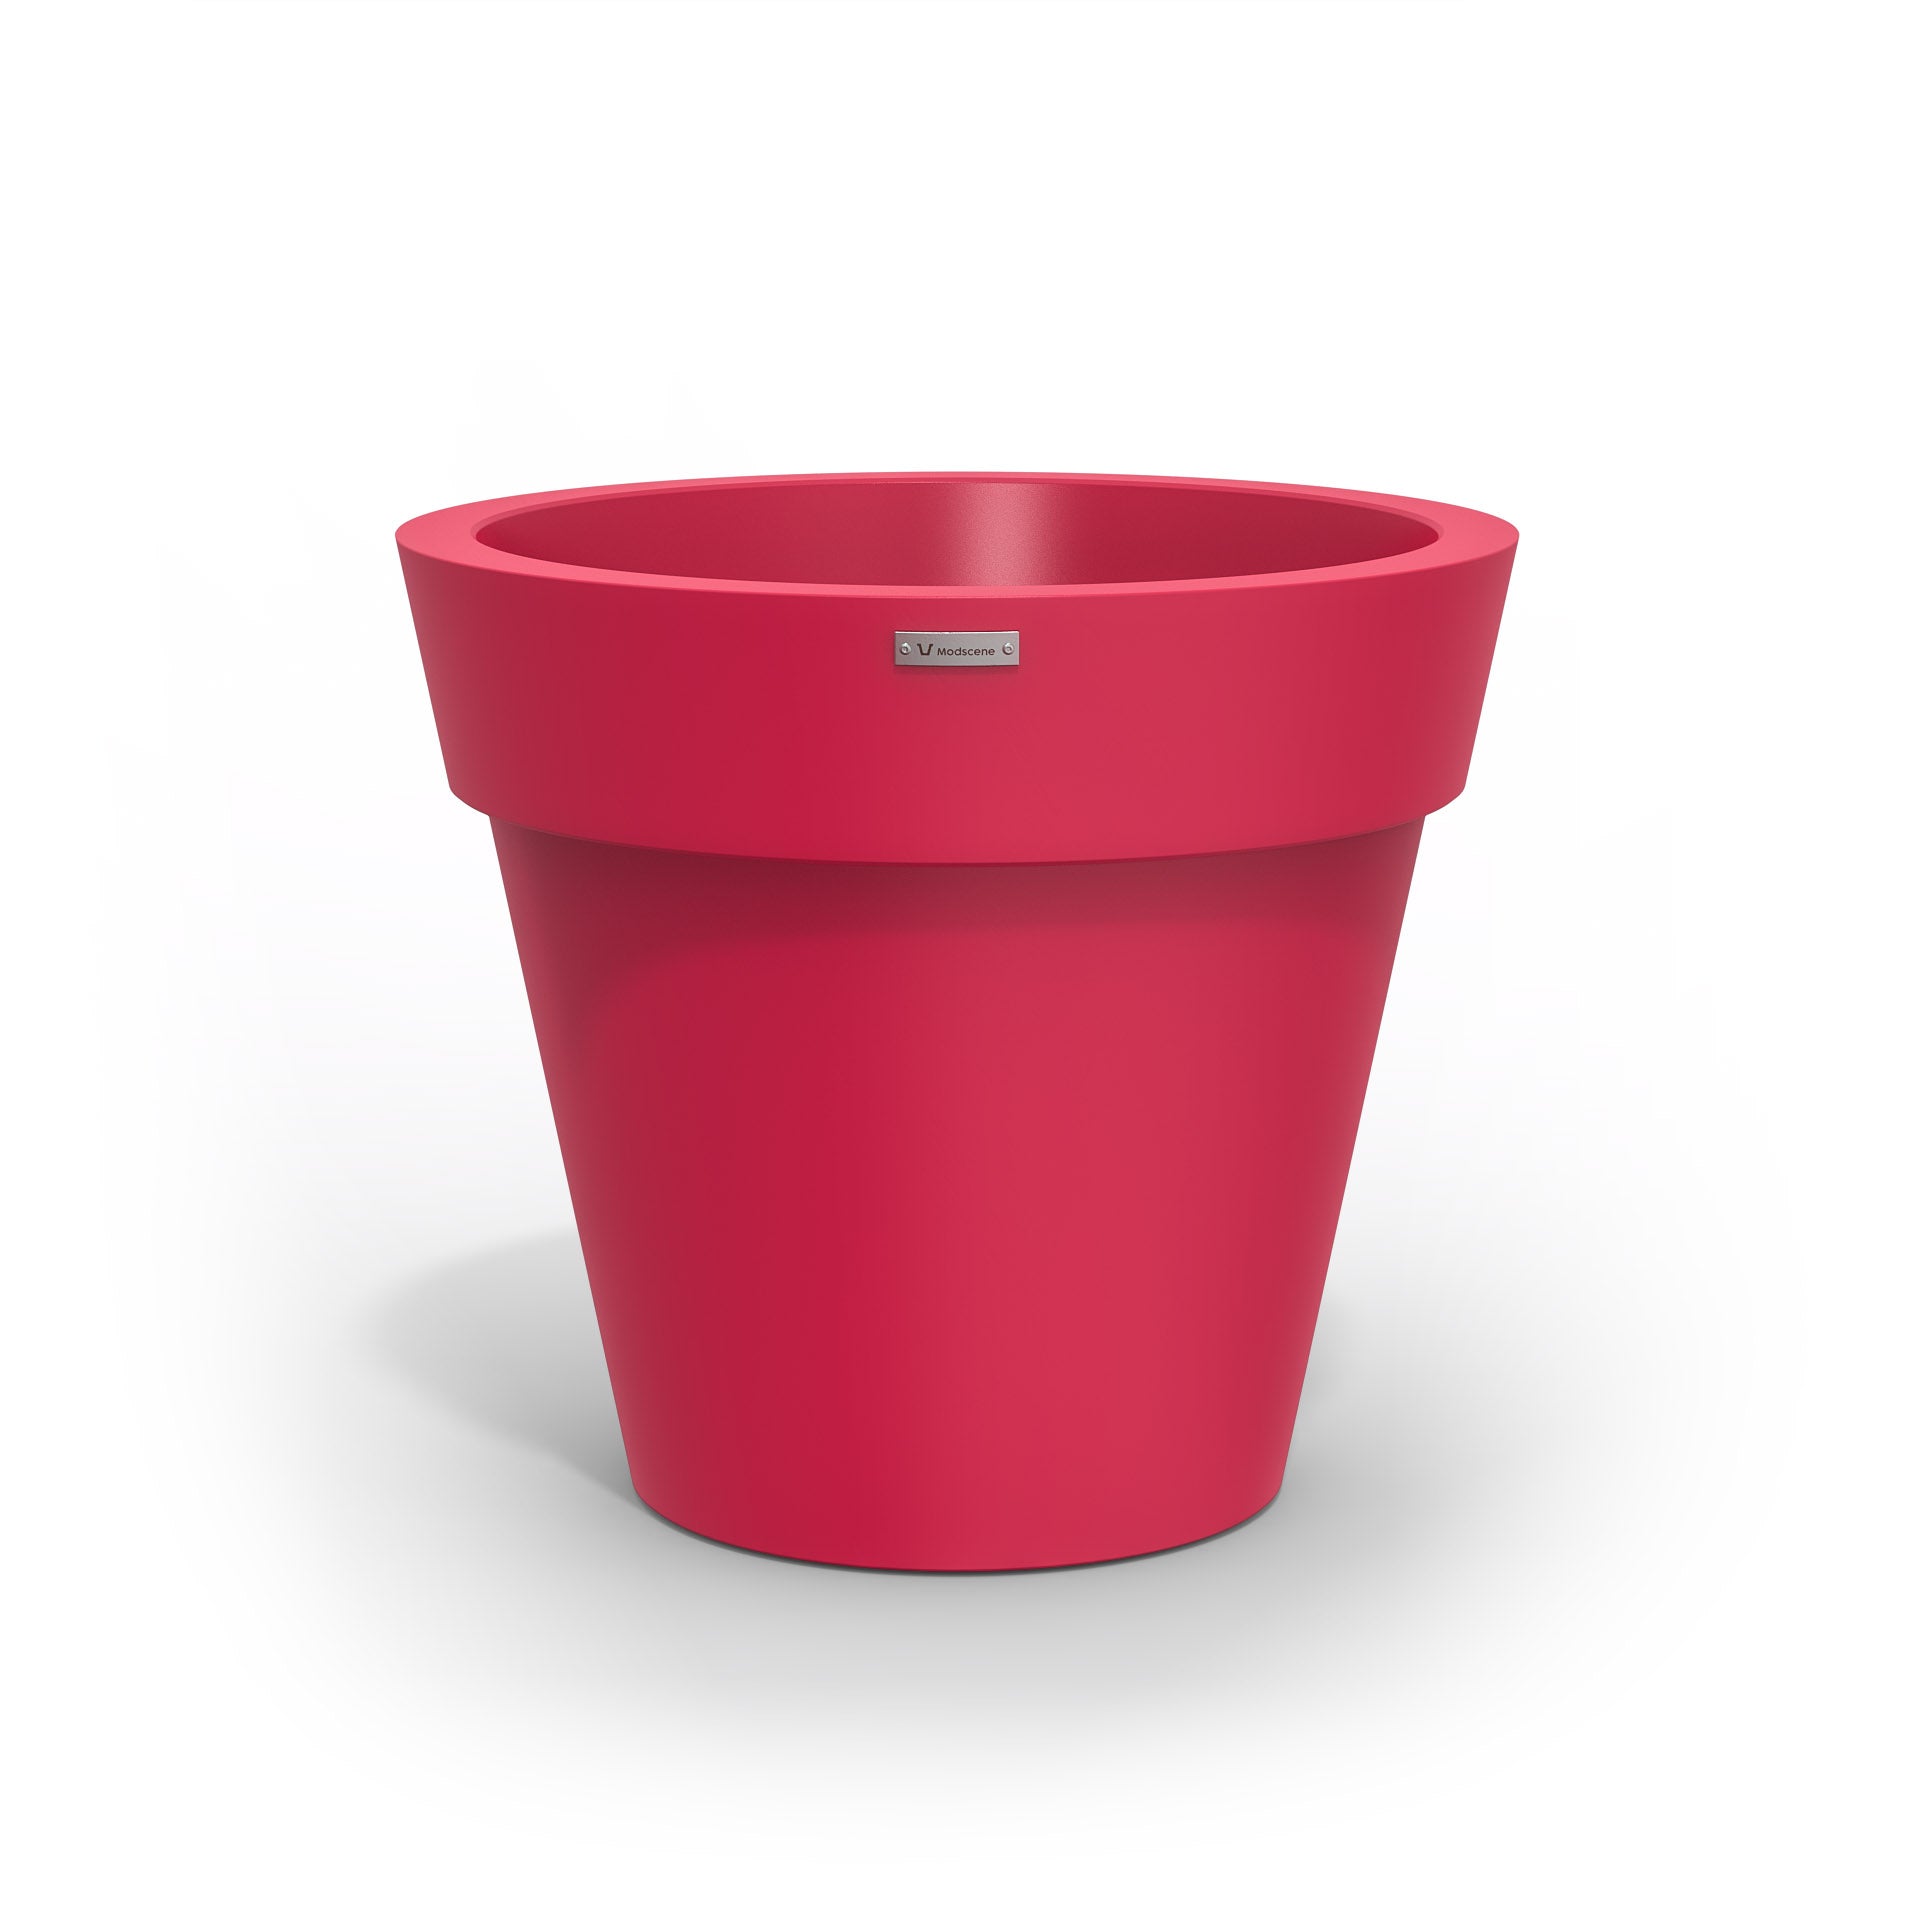 A pink Modscene plastic planter pot made in New Zealand.